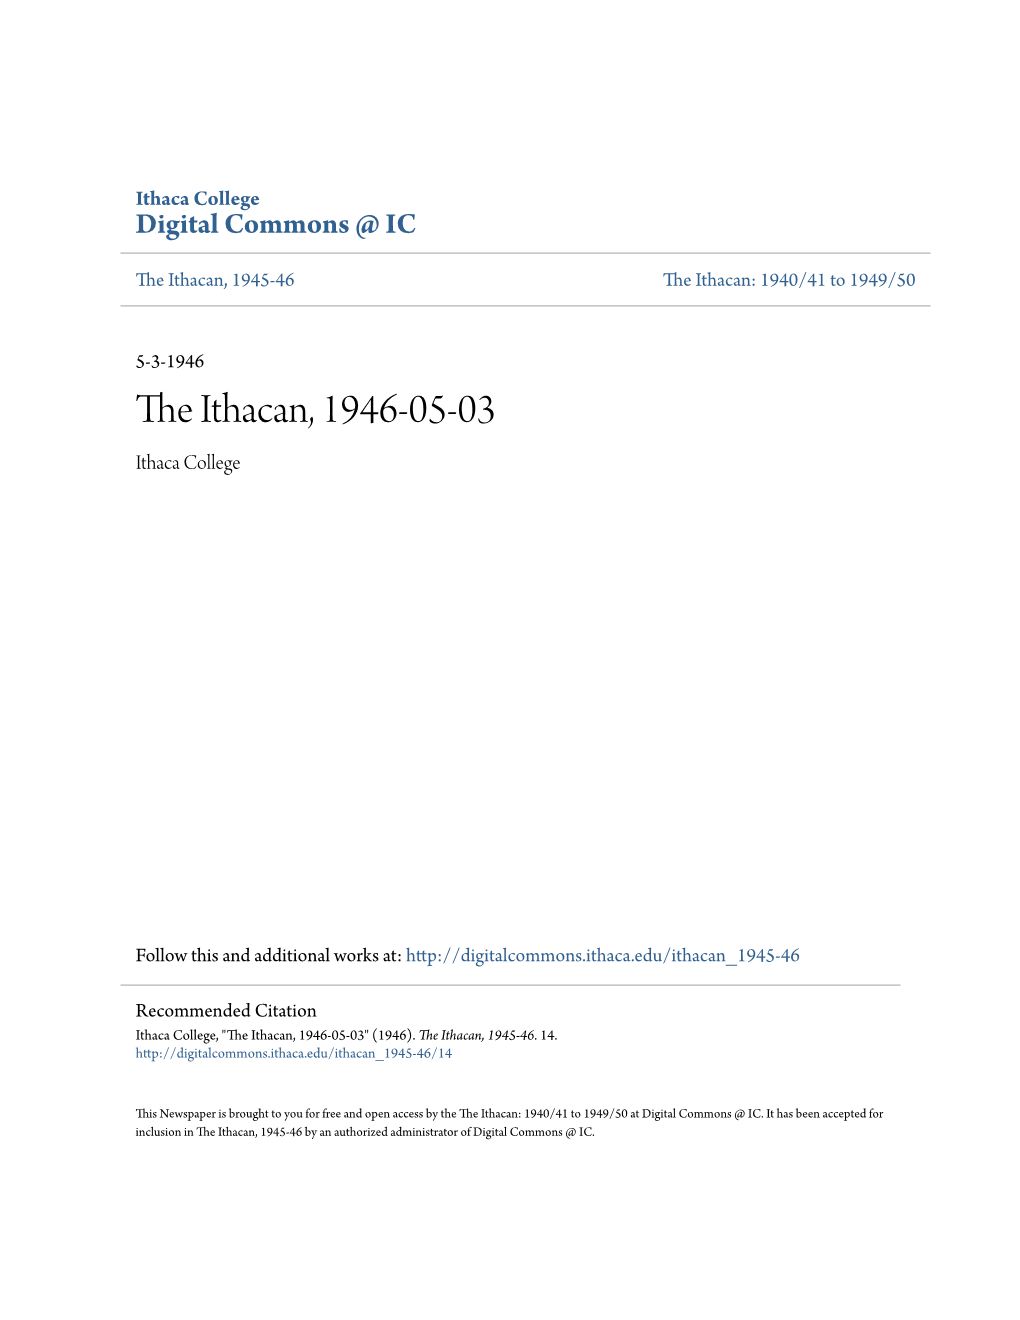 The Ithacan, 1946-05-03